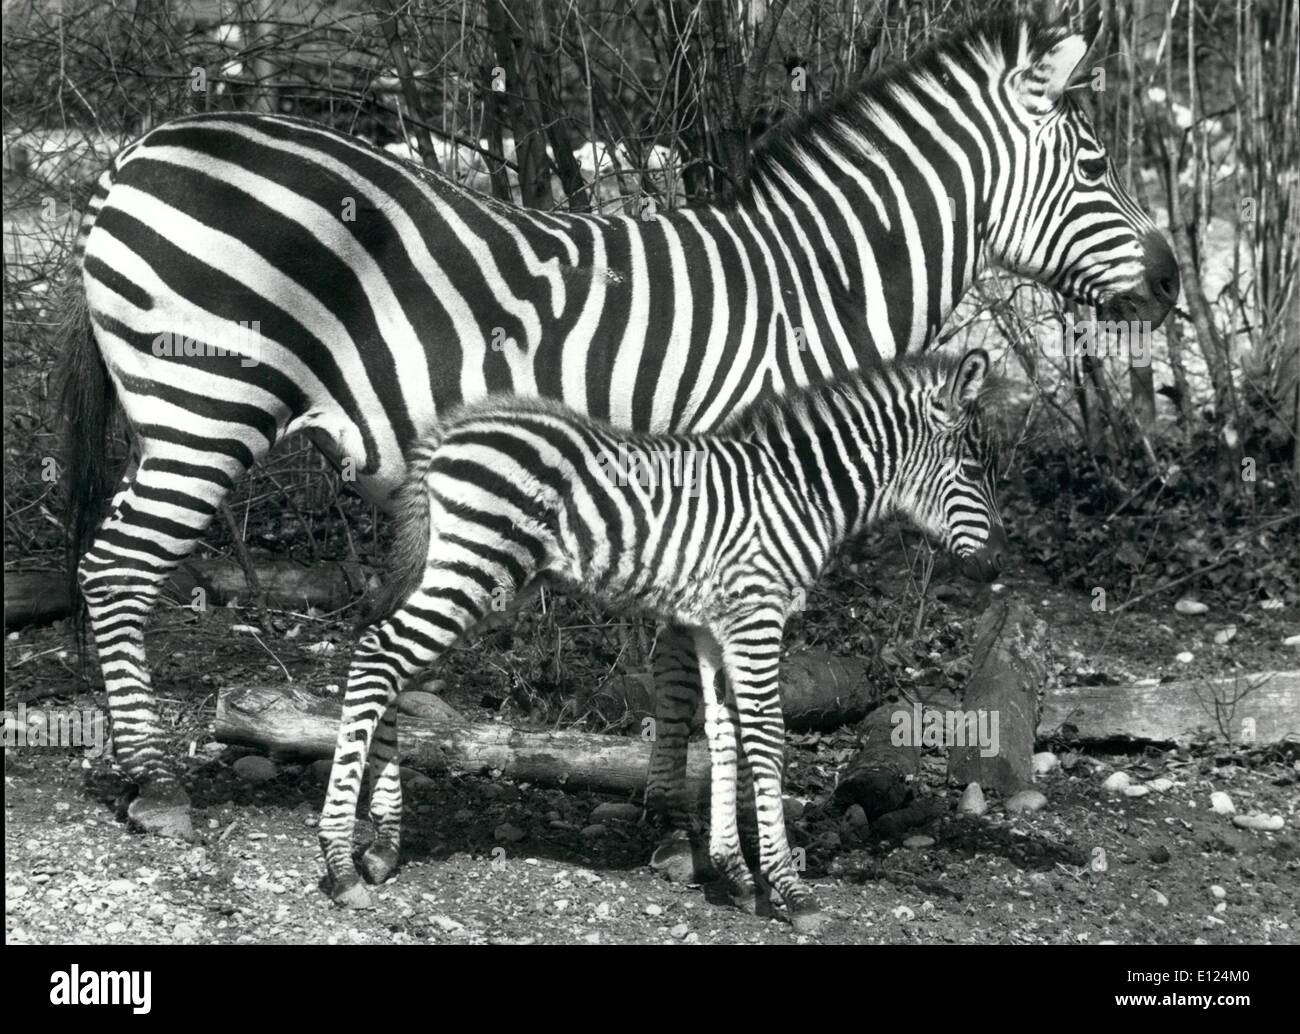 Mar. 03, 1986 - Baby-Zebra in Swiss zoological garden: A tiny zebra adds to the population in the swiss zoological garden in Basle. The Grant-zebra-mare Rebecca gave birth to the stallion-foal Ituri on march 18th. in the open. Normally with zebras, birth takes place in the stable. Like human fingerprints the zebra strips are distinctive in each individual animal. This feature allows the mother to recognize her foal. Stock Photo